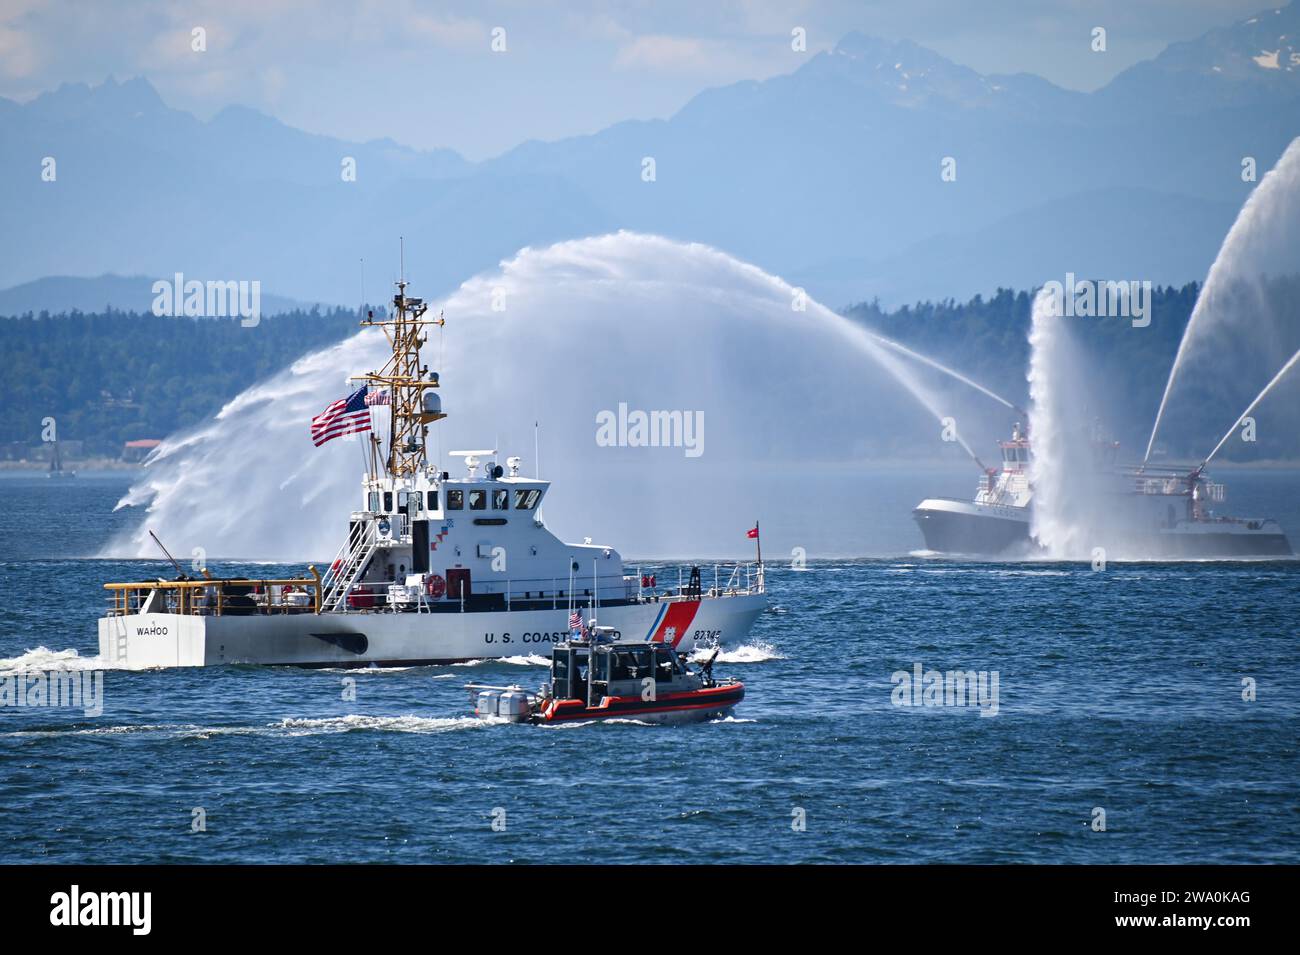 Coast Guard Cutter Wahoo [WPB 87345] and a 29-foot Response Boat-Small transit Elliott Bay near Seattle, Wash., Aug. 1, 2023. A fire boat from the Seattle Fire Department can be seen spraying water from several nozzles as the boats pass by. (U.S. Coast Guard photo by Petty Officer Steve Strohmaier) Stock Photo